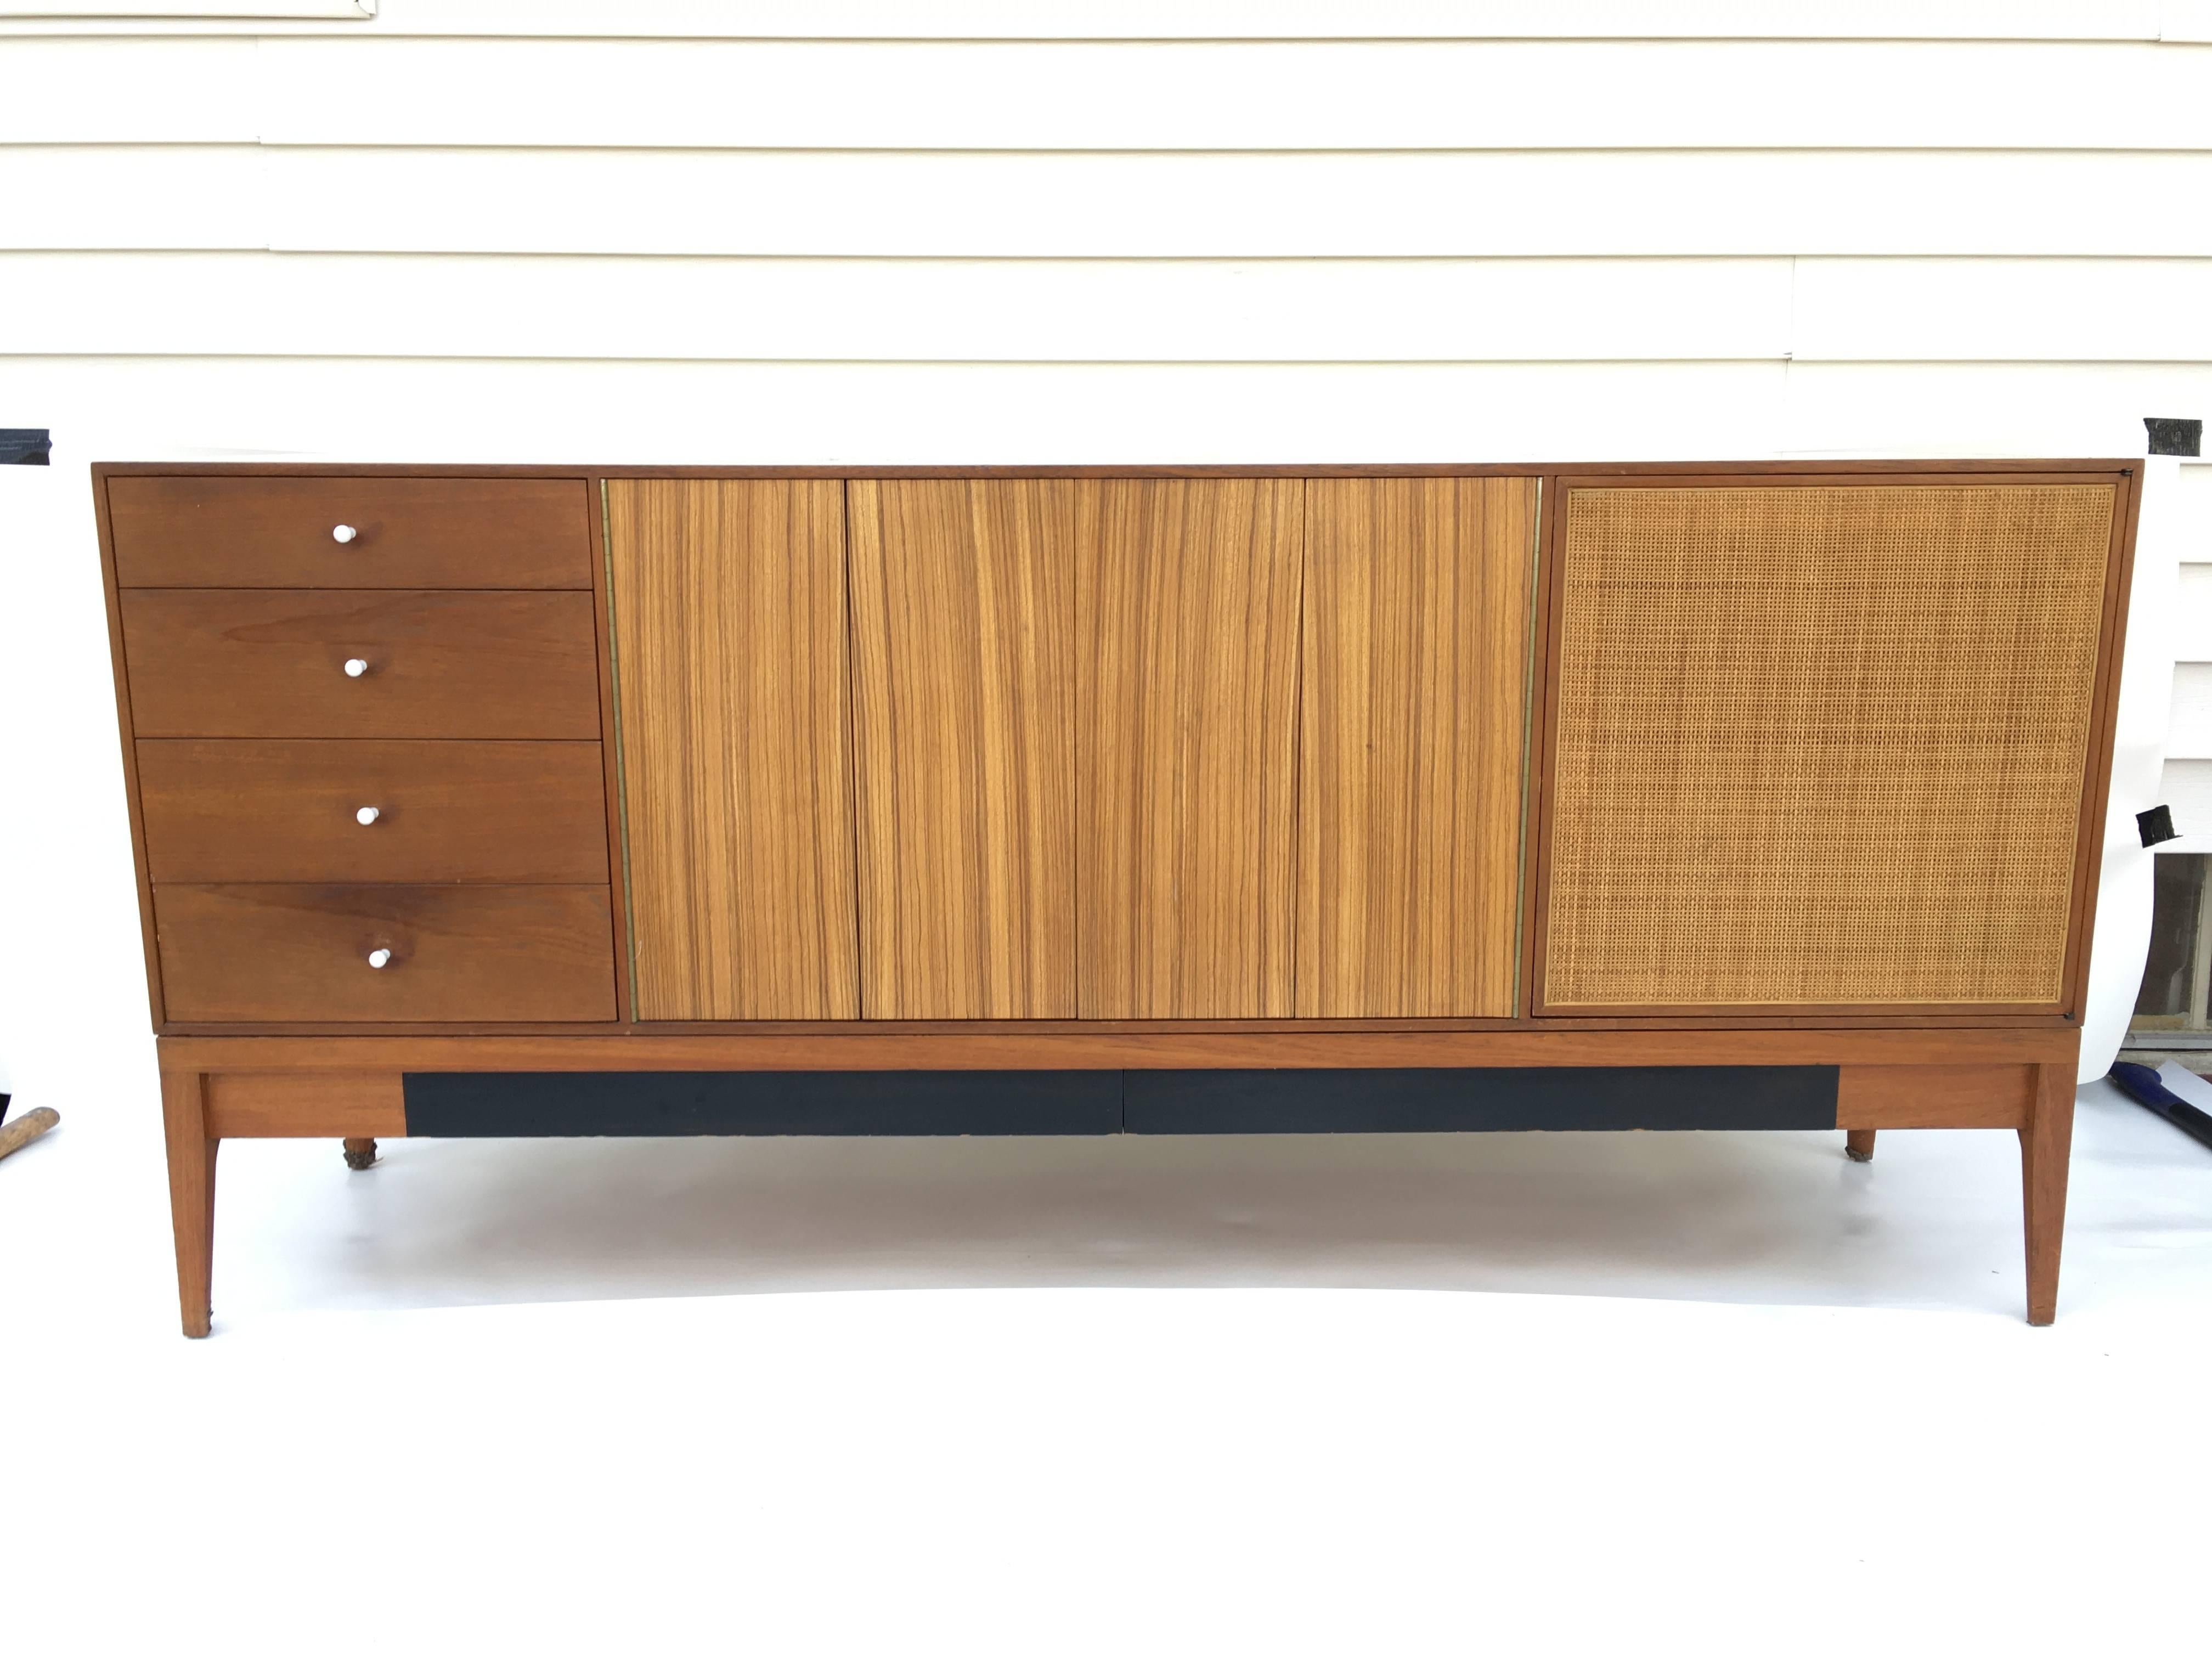 Offered is an incredible 1950s modular dresser by Grosfeld House. This dresser is composed of three pieces. The top piece rests on the dresser below and features two spring loaded doors which open up to shelves, drawers and a lift-top dressing